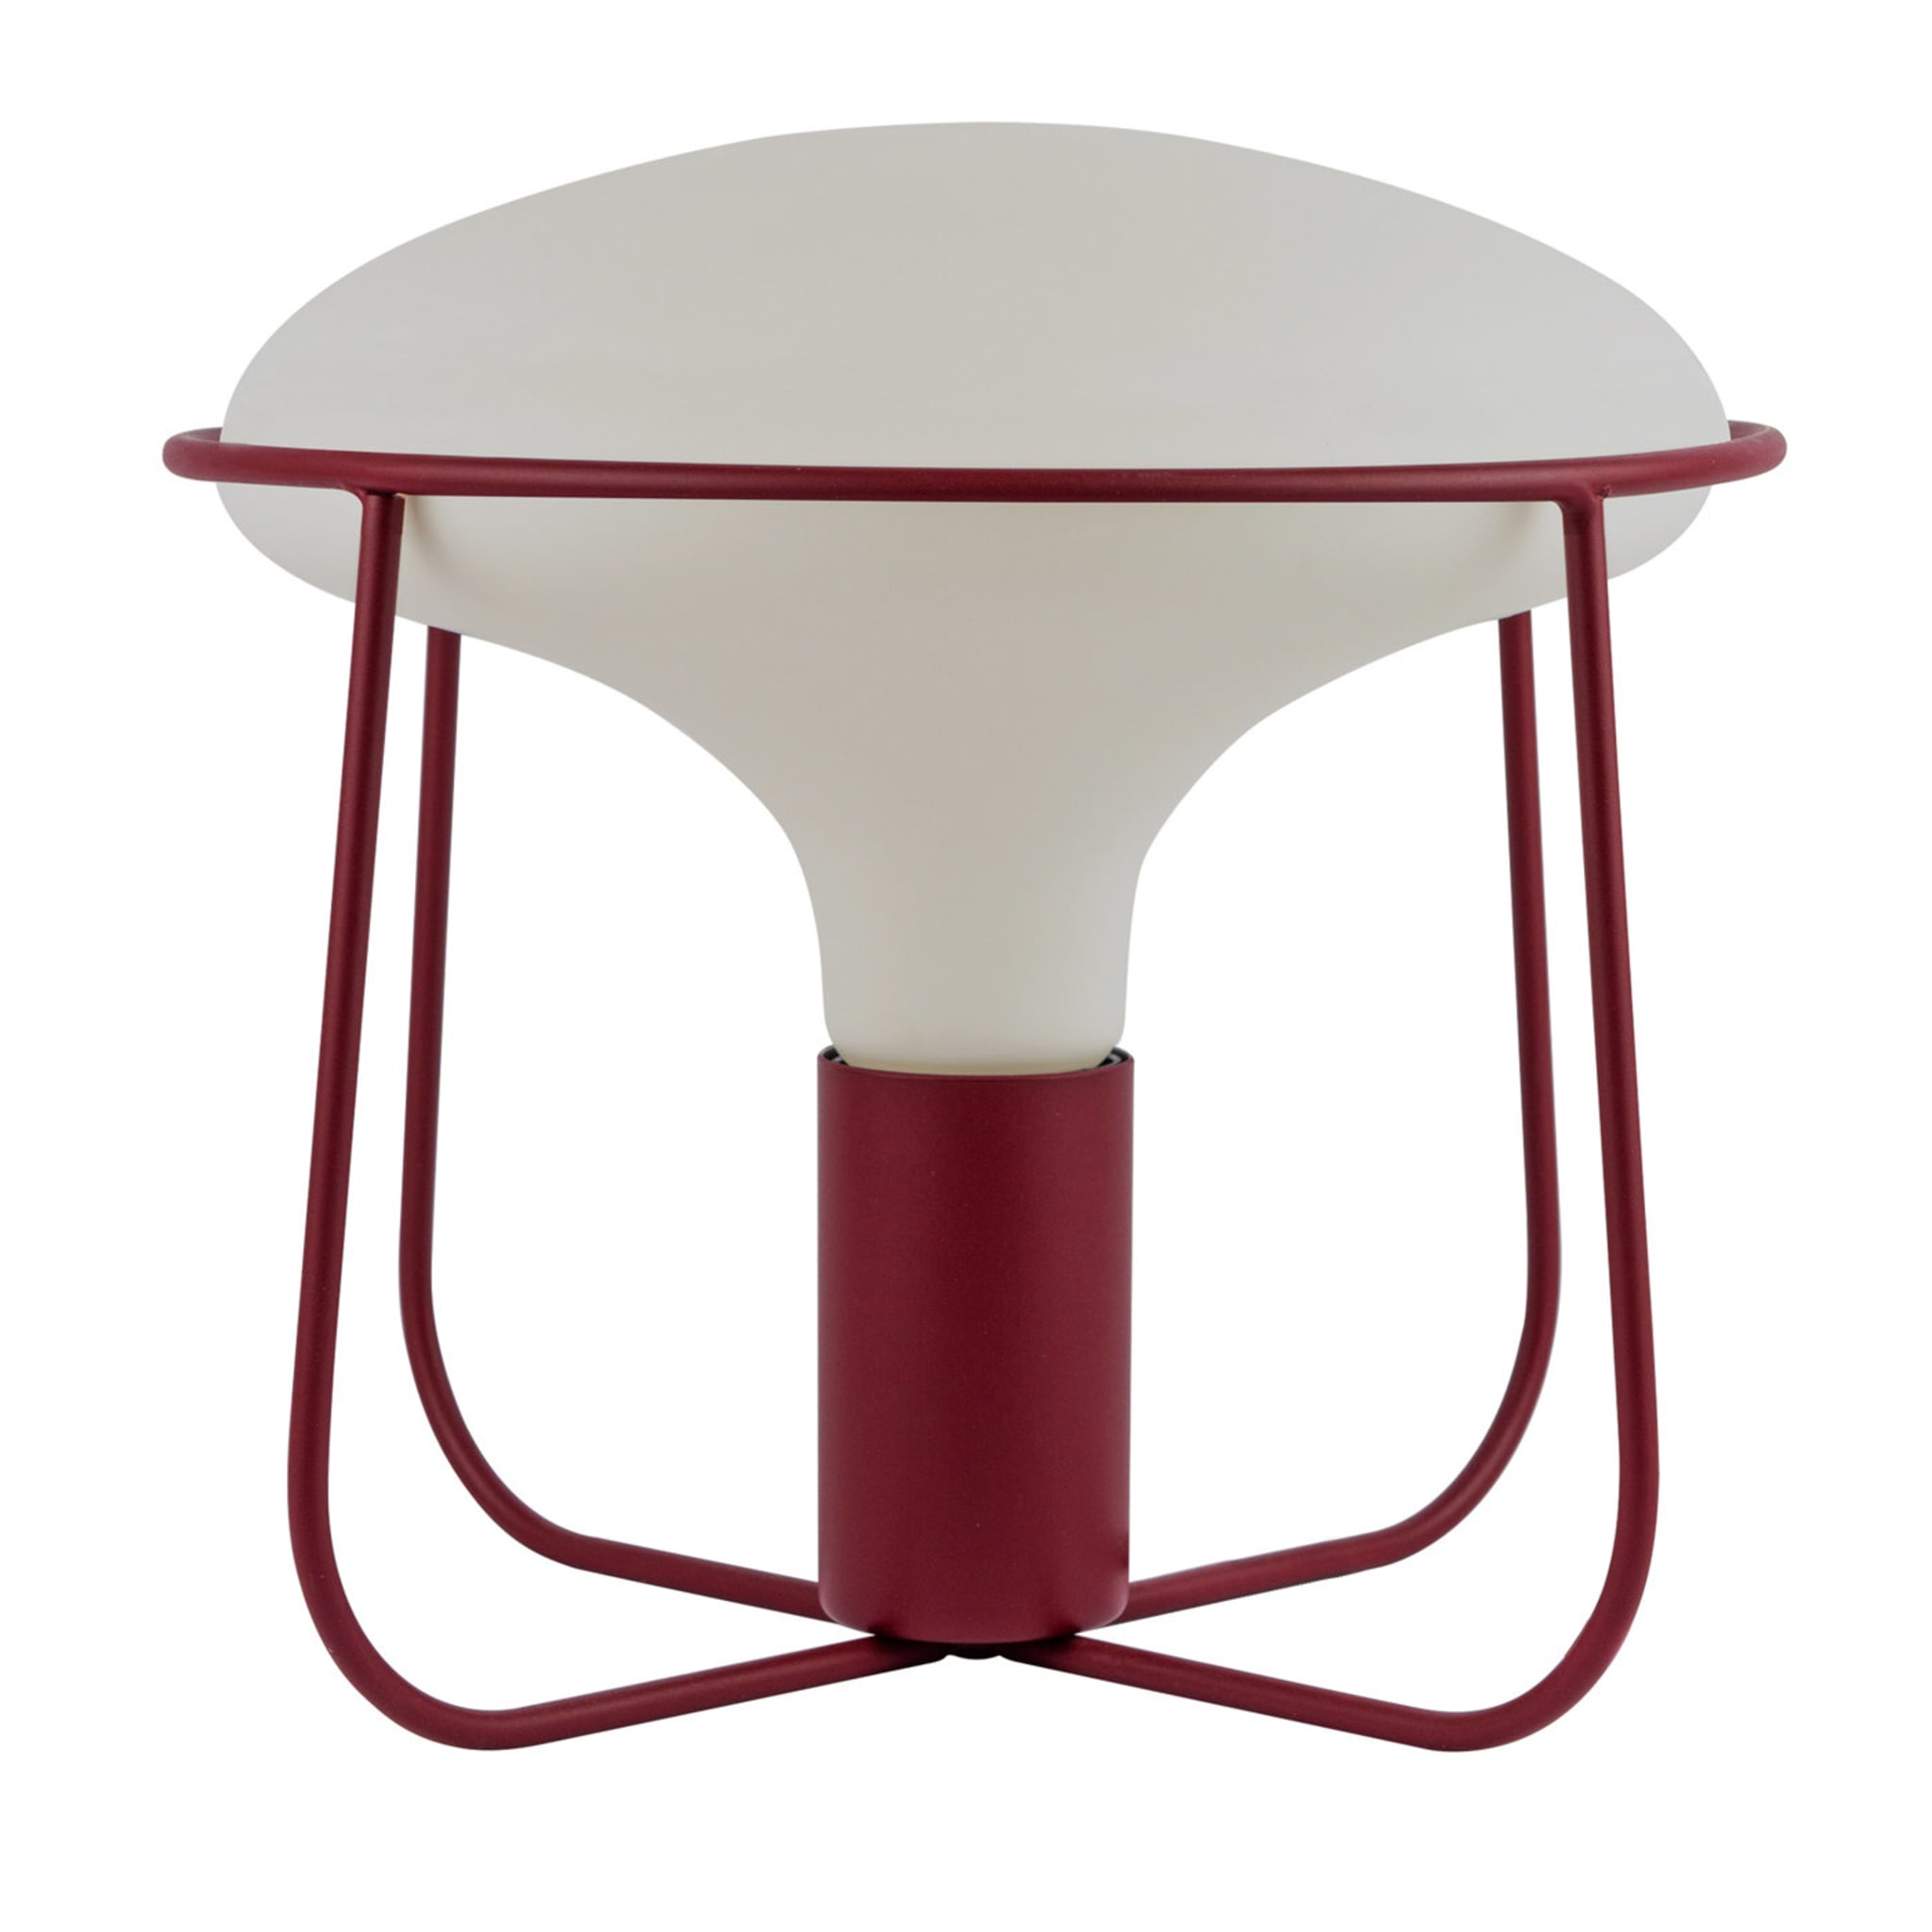 Jelly Red Table Lamp by Alalda Design - Main view